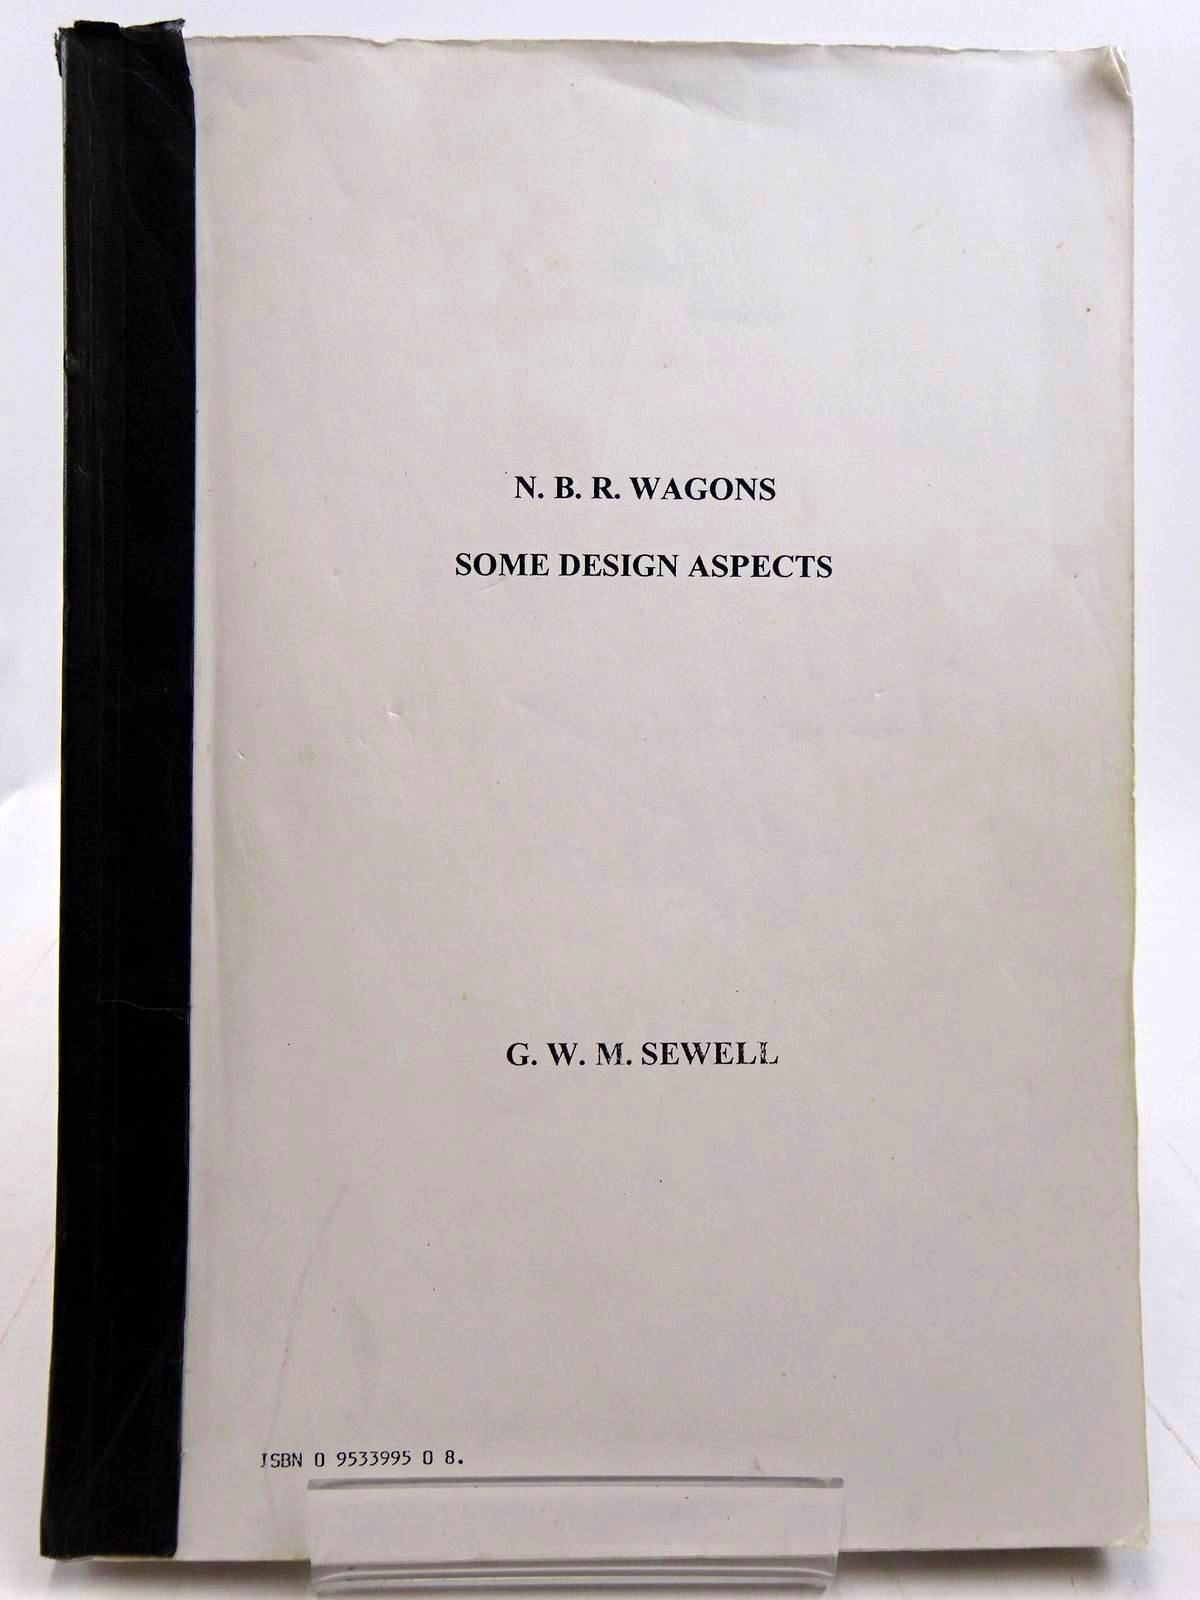 Photo of N.B.R. WAGONS SOME ASPECT DESIGNS written by Sewell, G.W.M. published by G.W.M. Sewell (STOCK CODE: 2131391)  for sale by Stella & Rose's Books